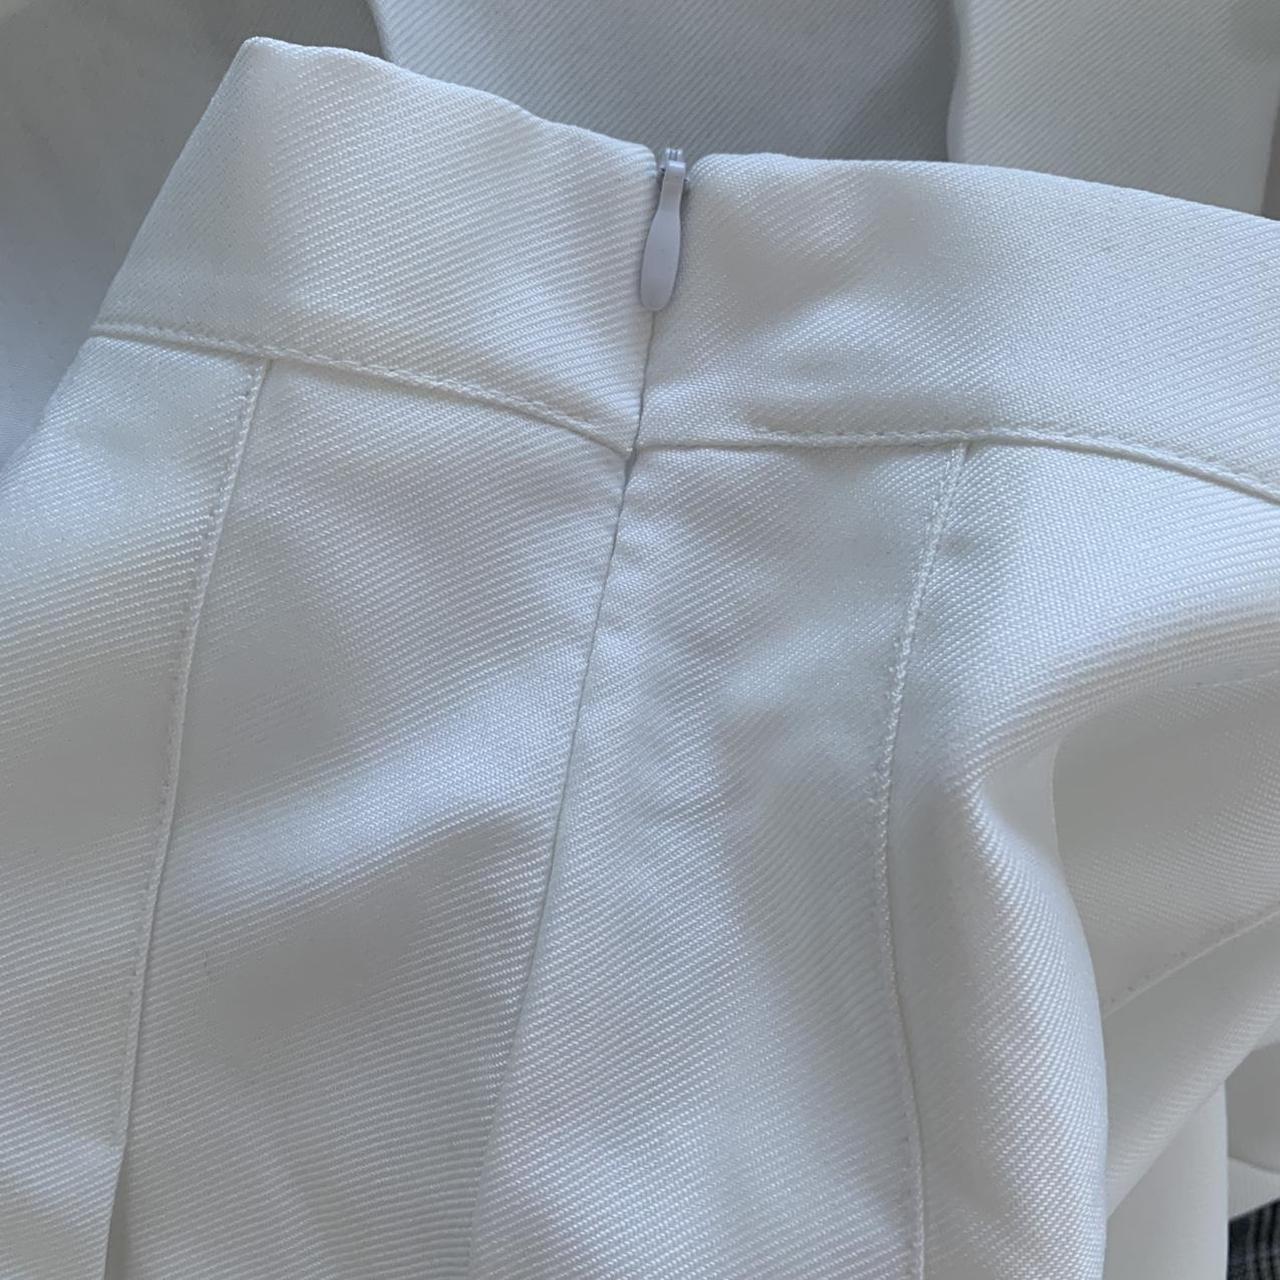 Pleated white skirt Skort - comes with pants under... - Depop